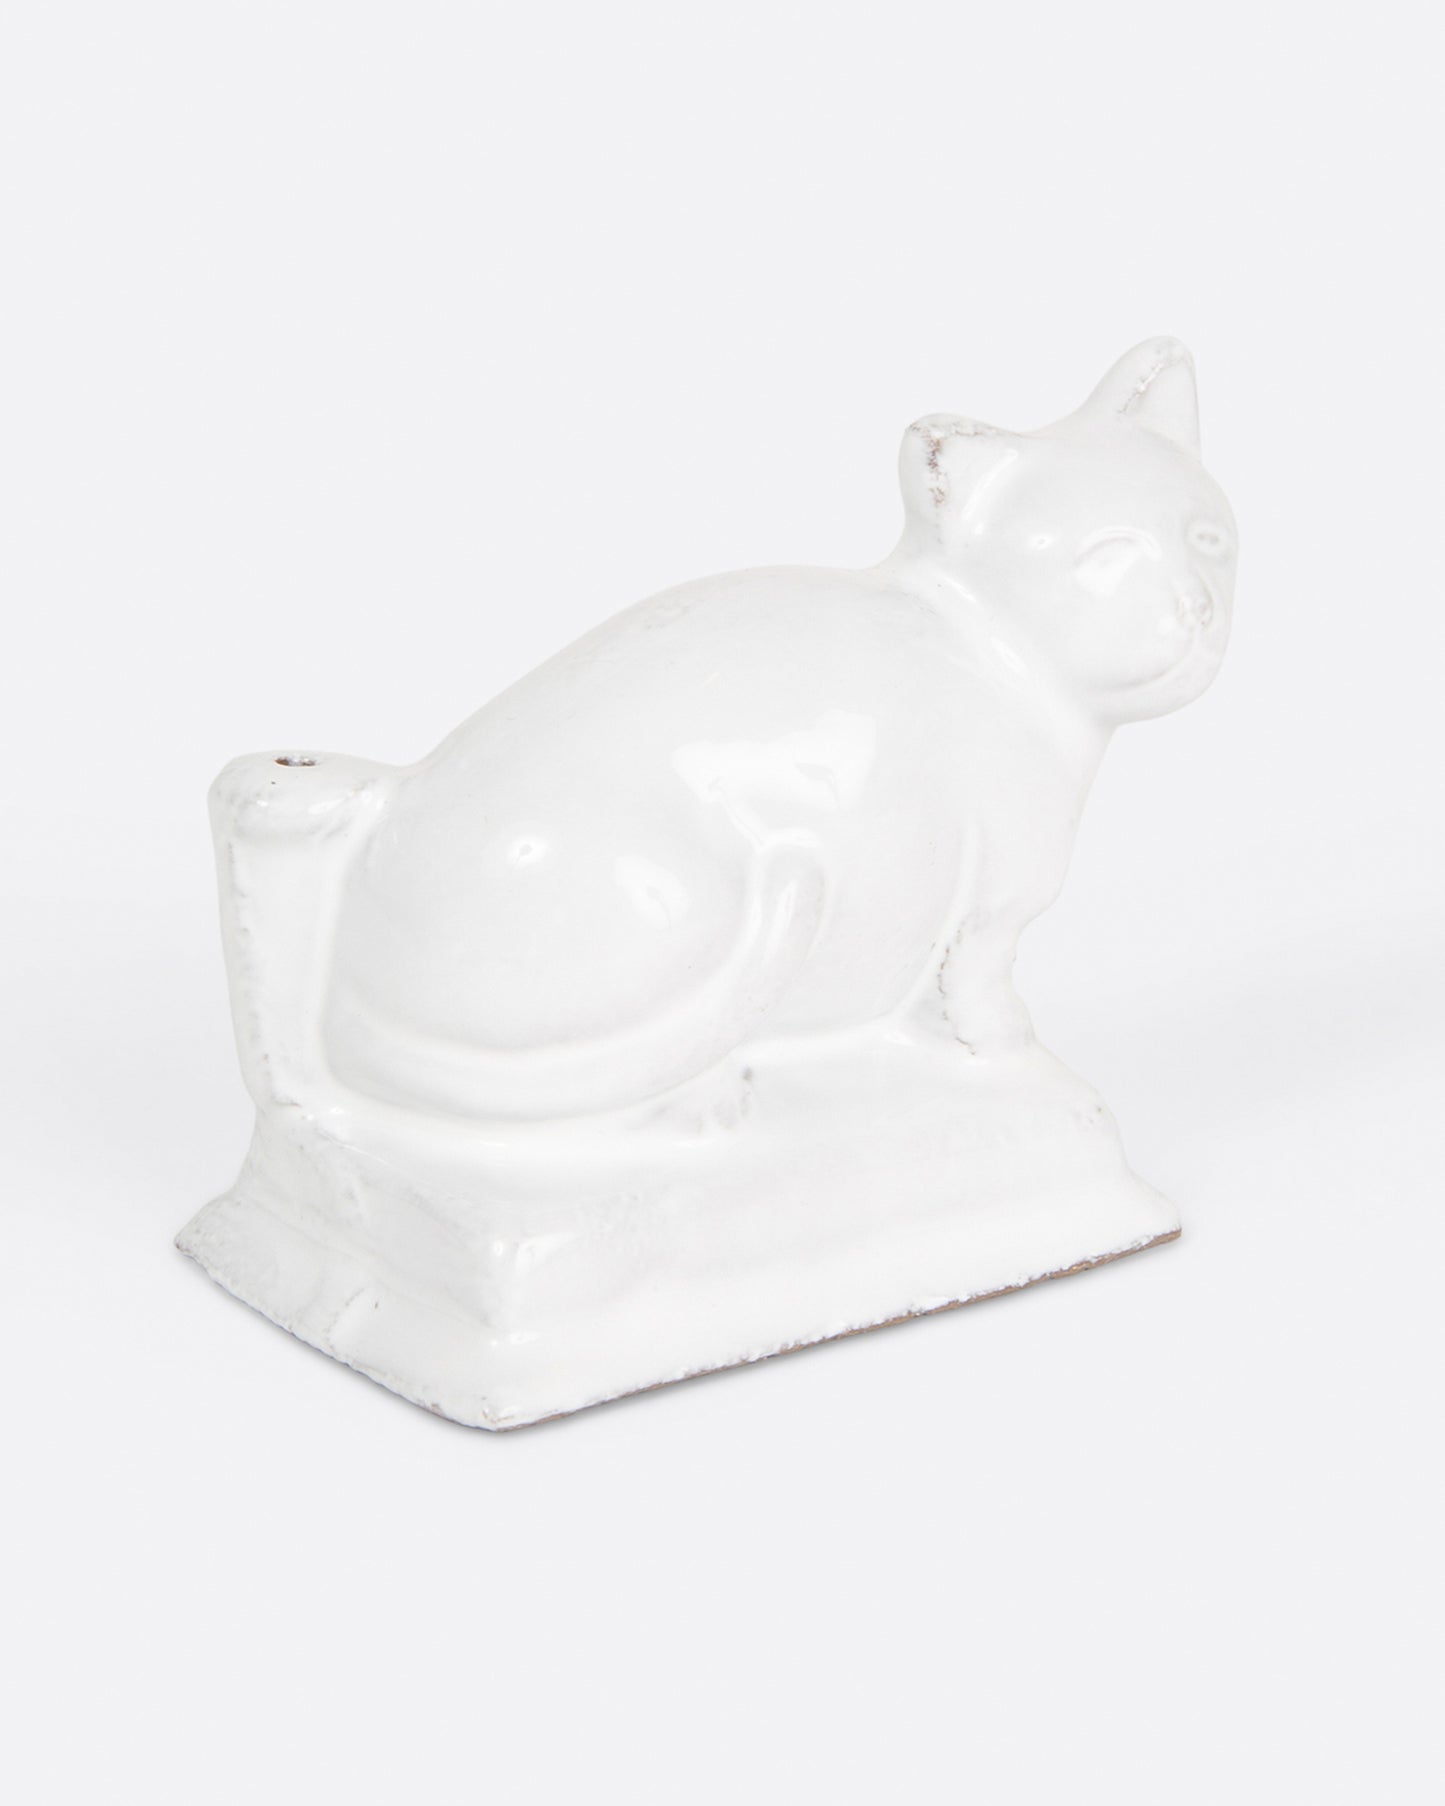 A glazed white ceramic cat-shaped incense holder, shown from the side.